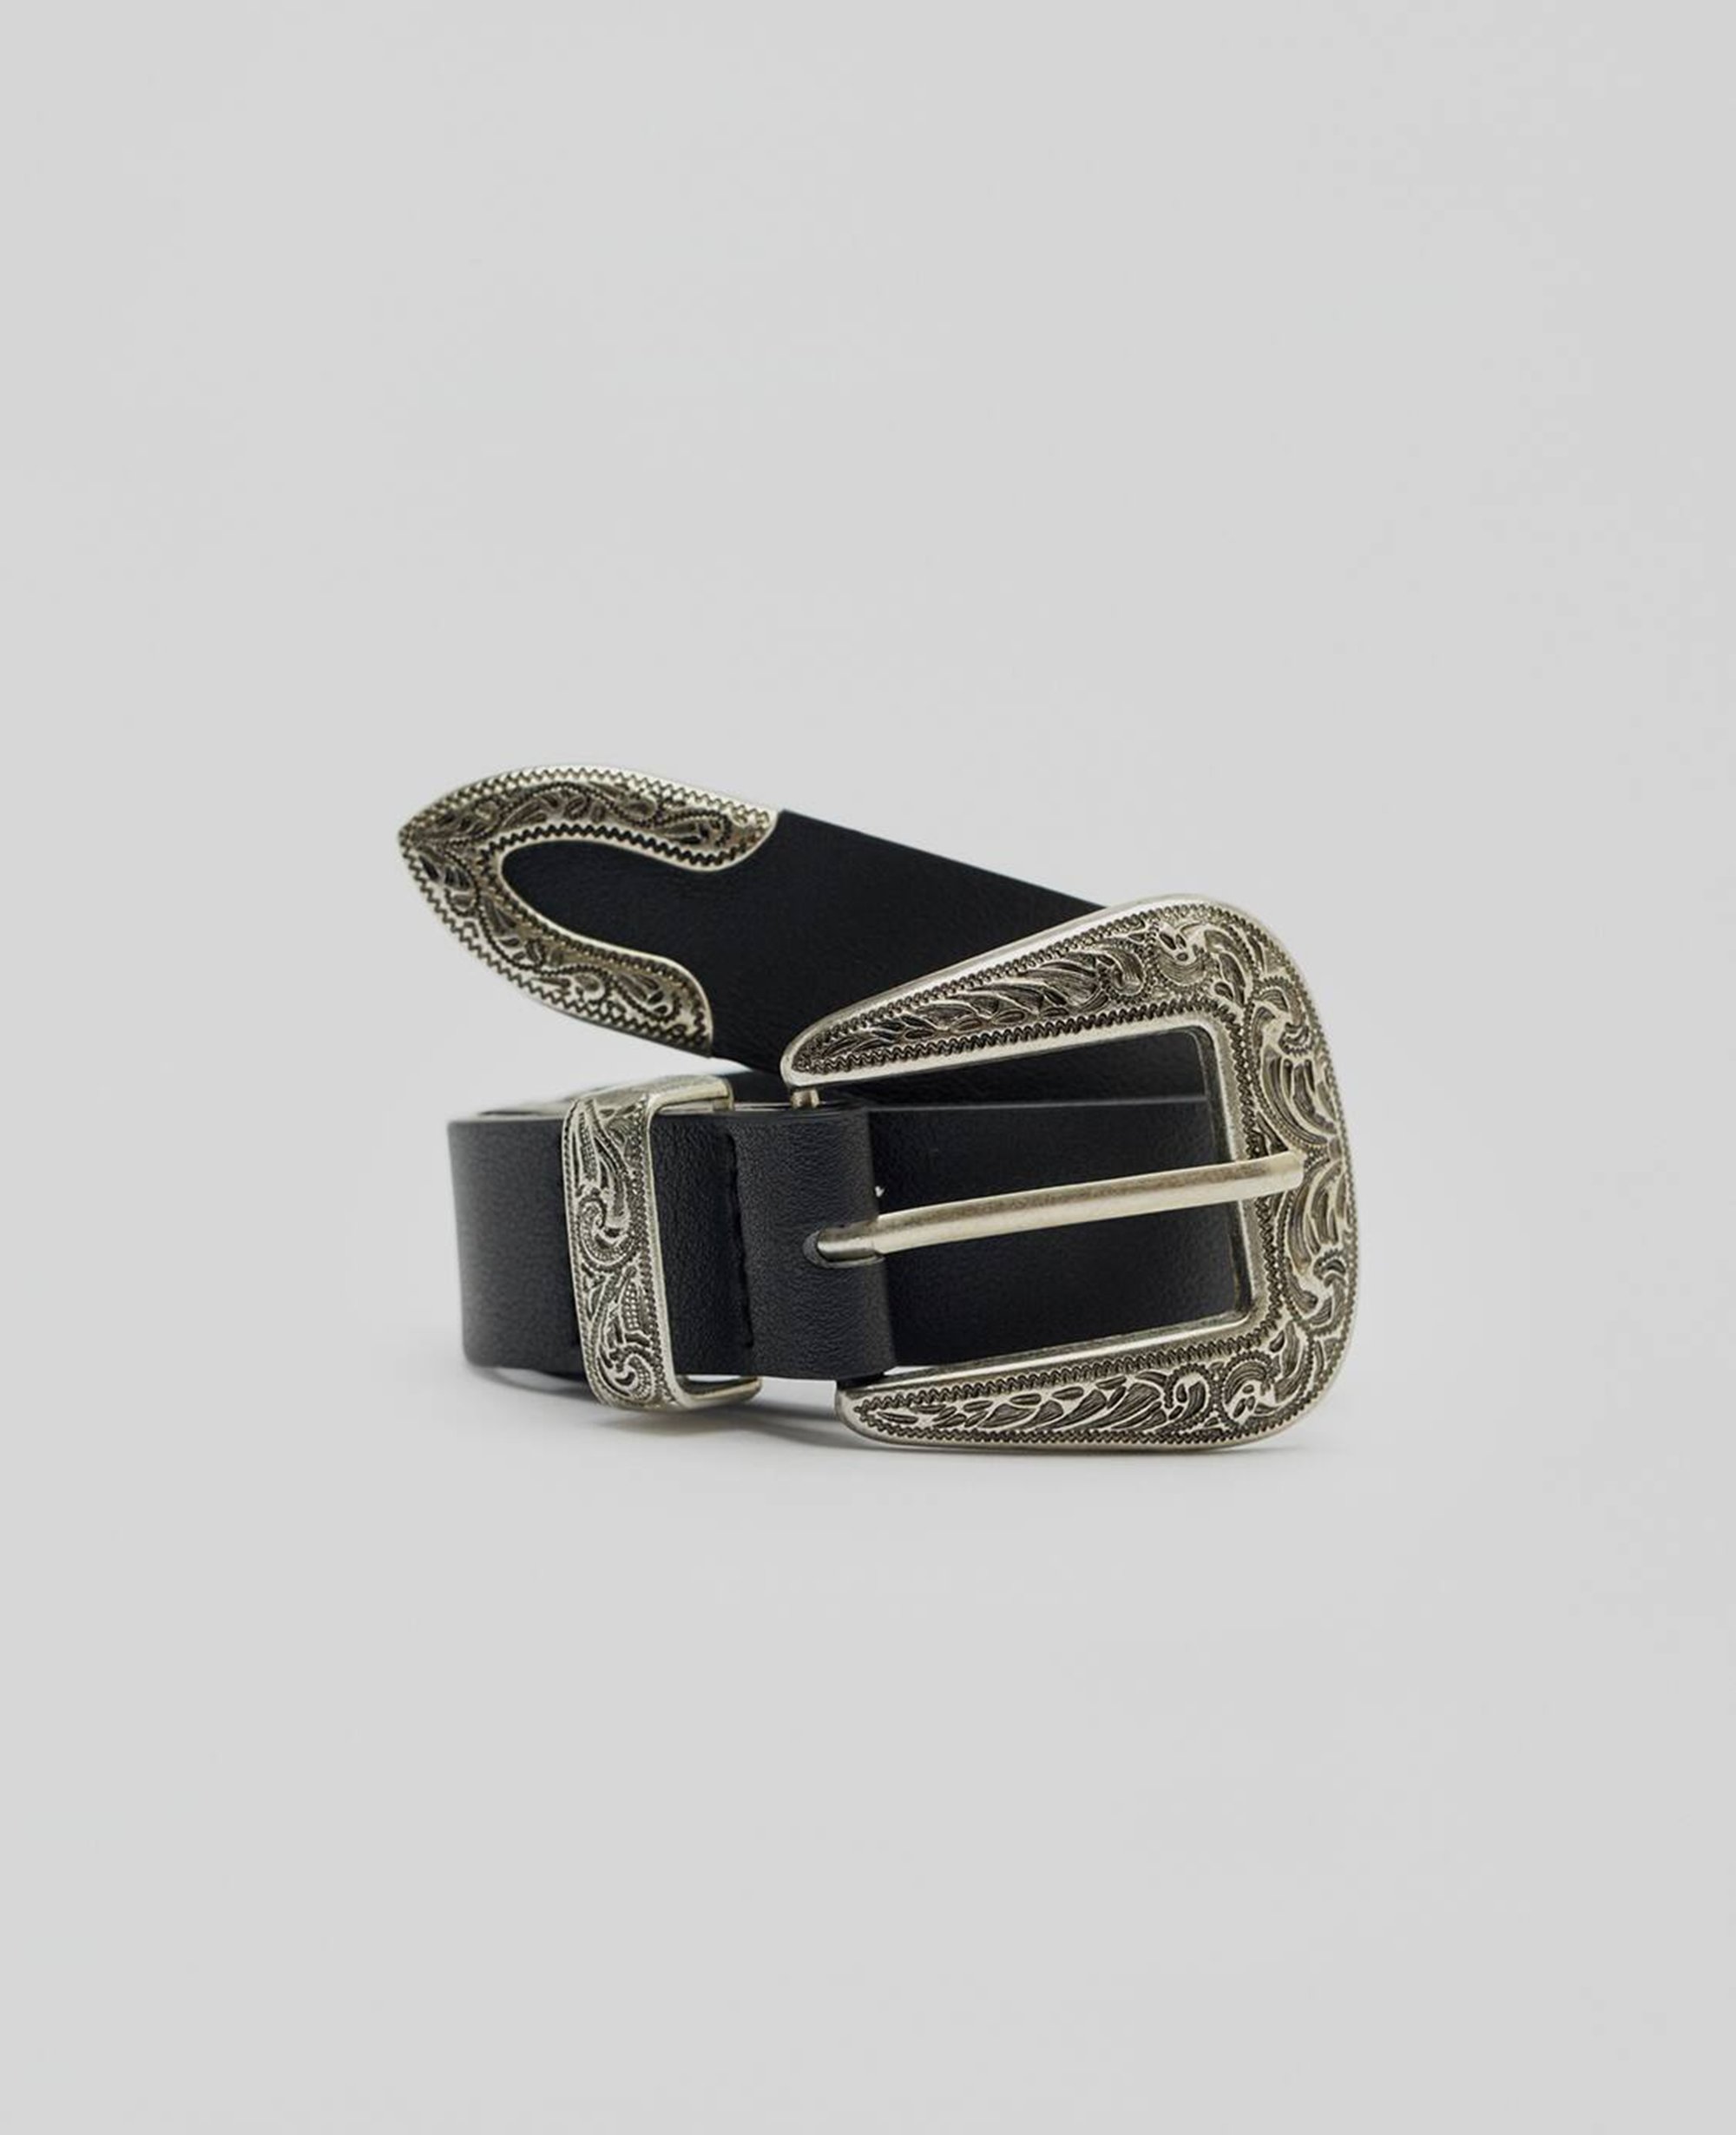 5 Fashionable Belts Every Woman Should Own – Amsterdam Heritage